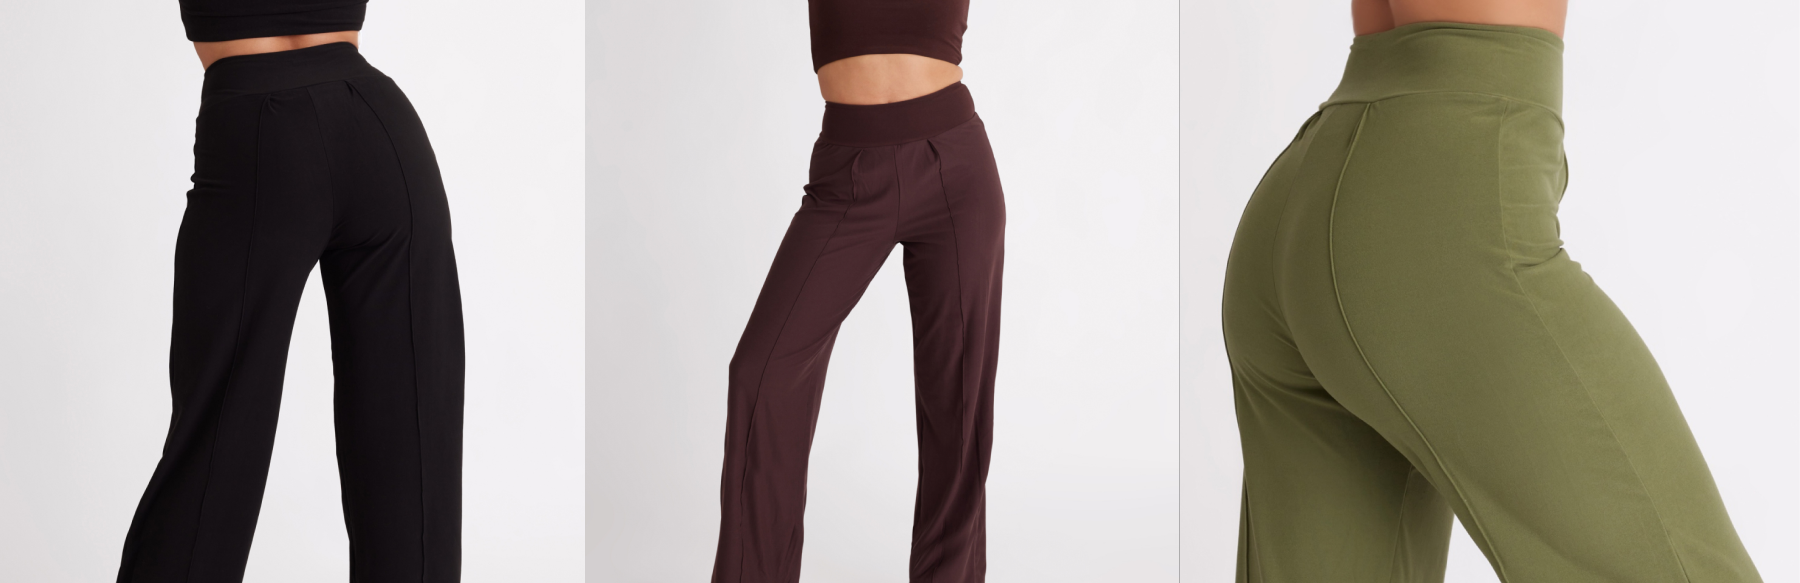 Wide Leg Pants Hero Image Wolven Threads